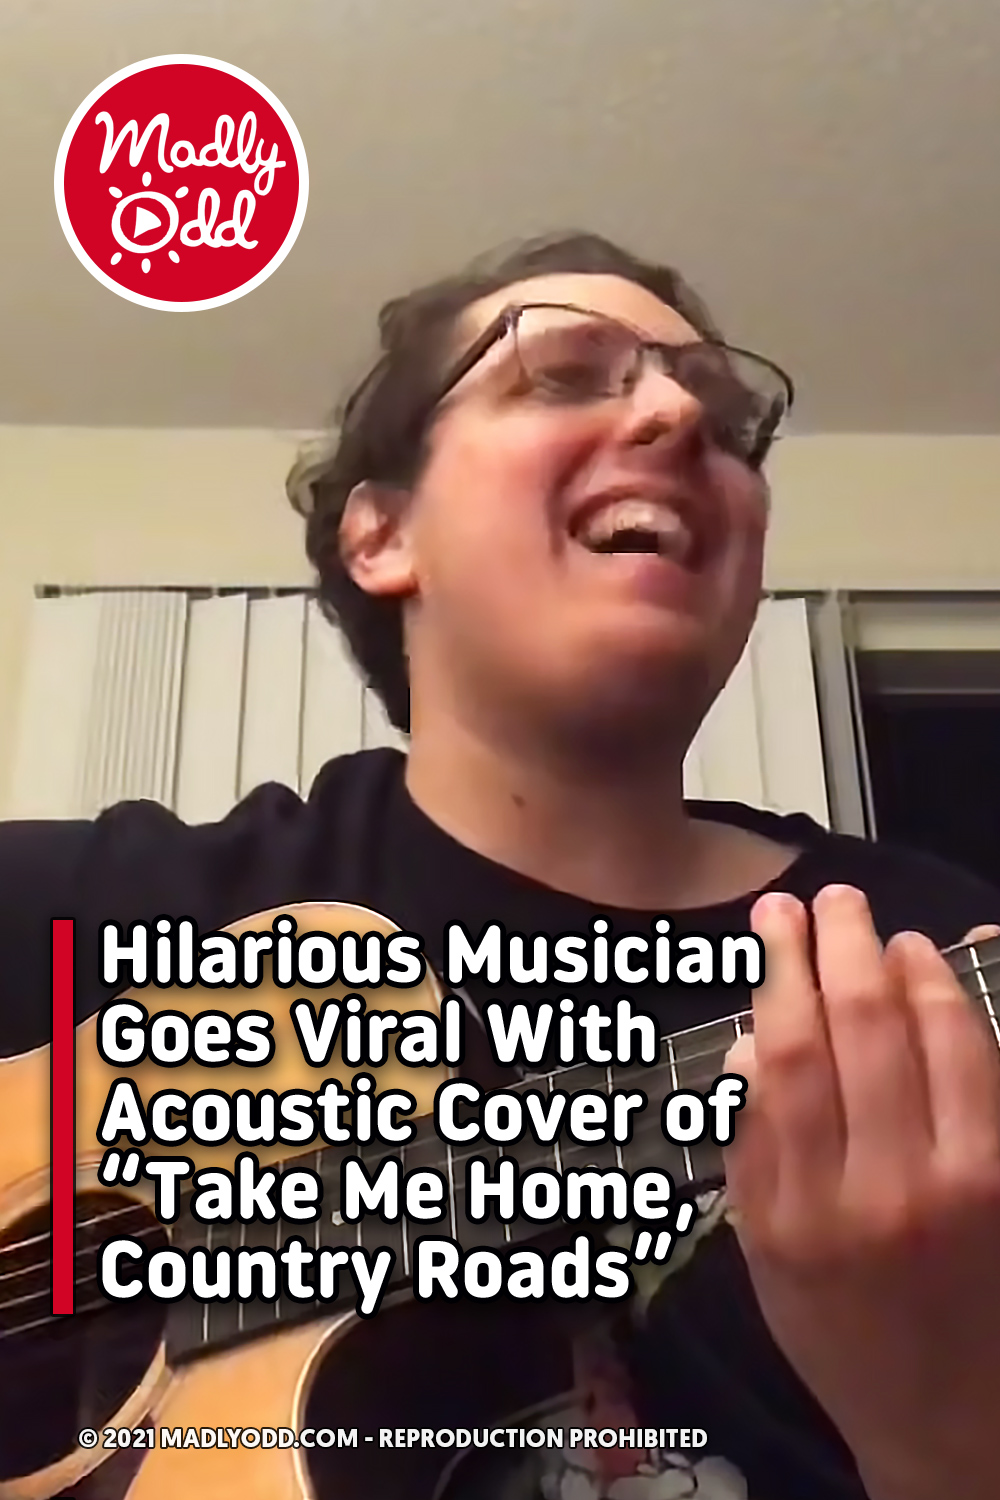 Hilarious Musician Goes Viral With Acoustic Cover of “Take Me Home, Country Roads”